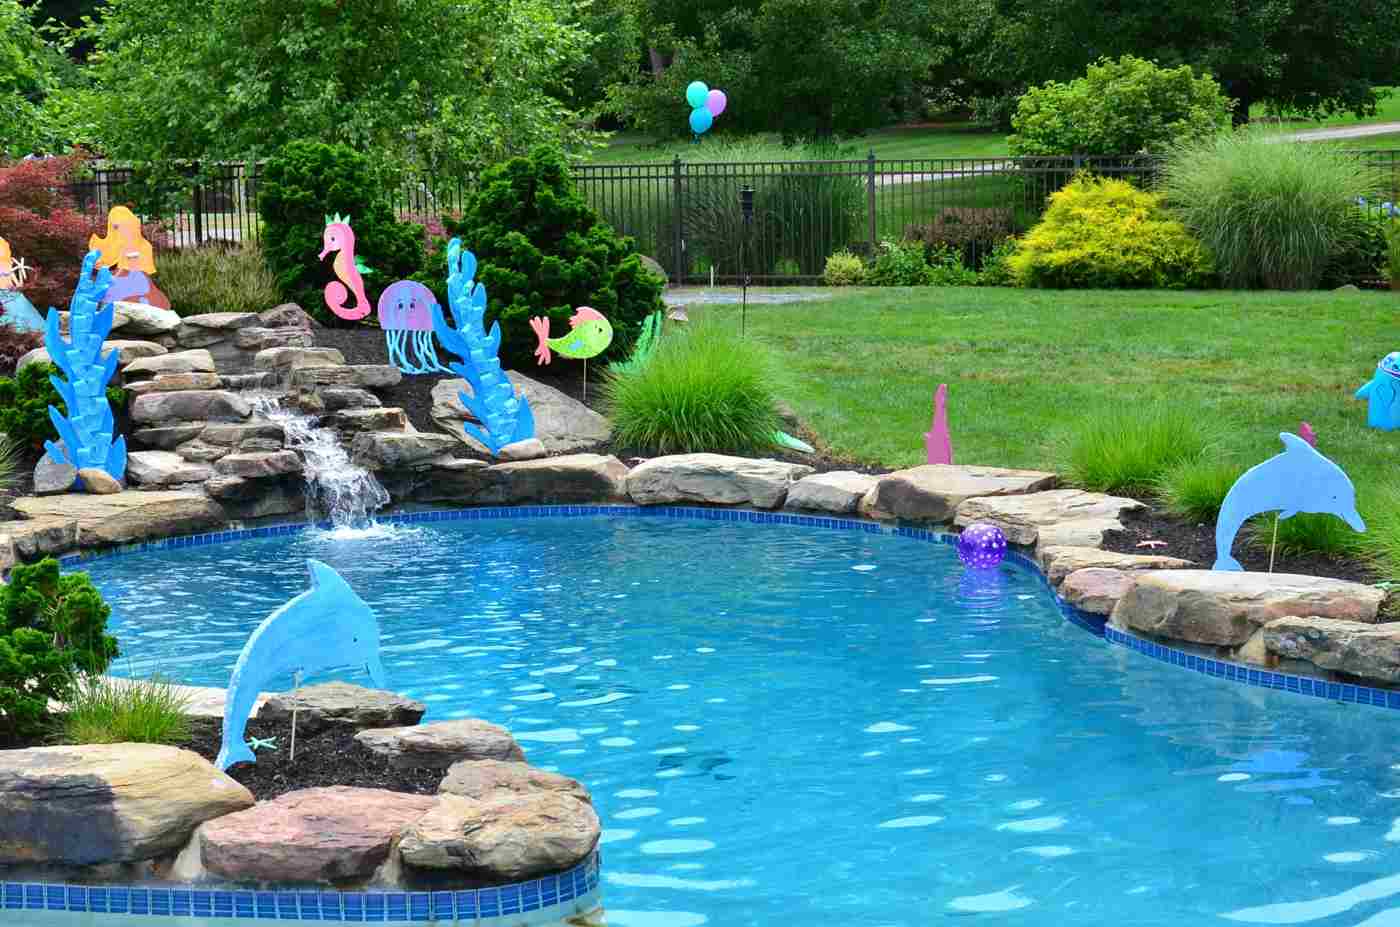 Pool decorations for the pool party for children's shower